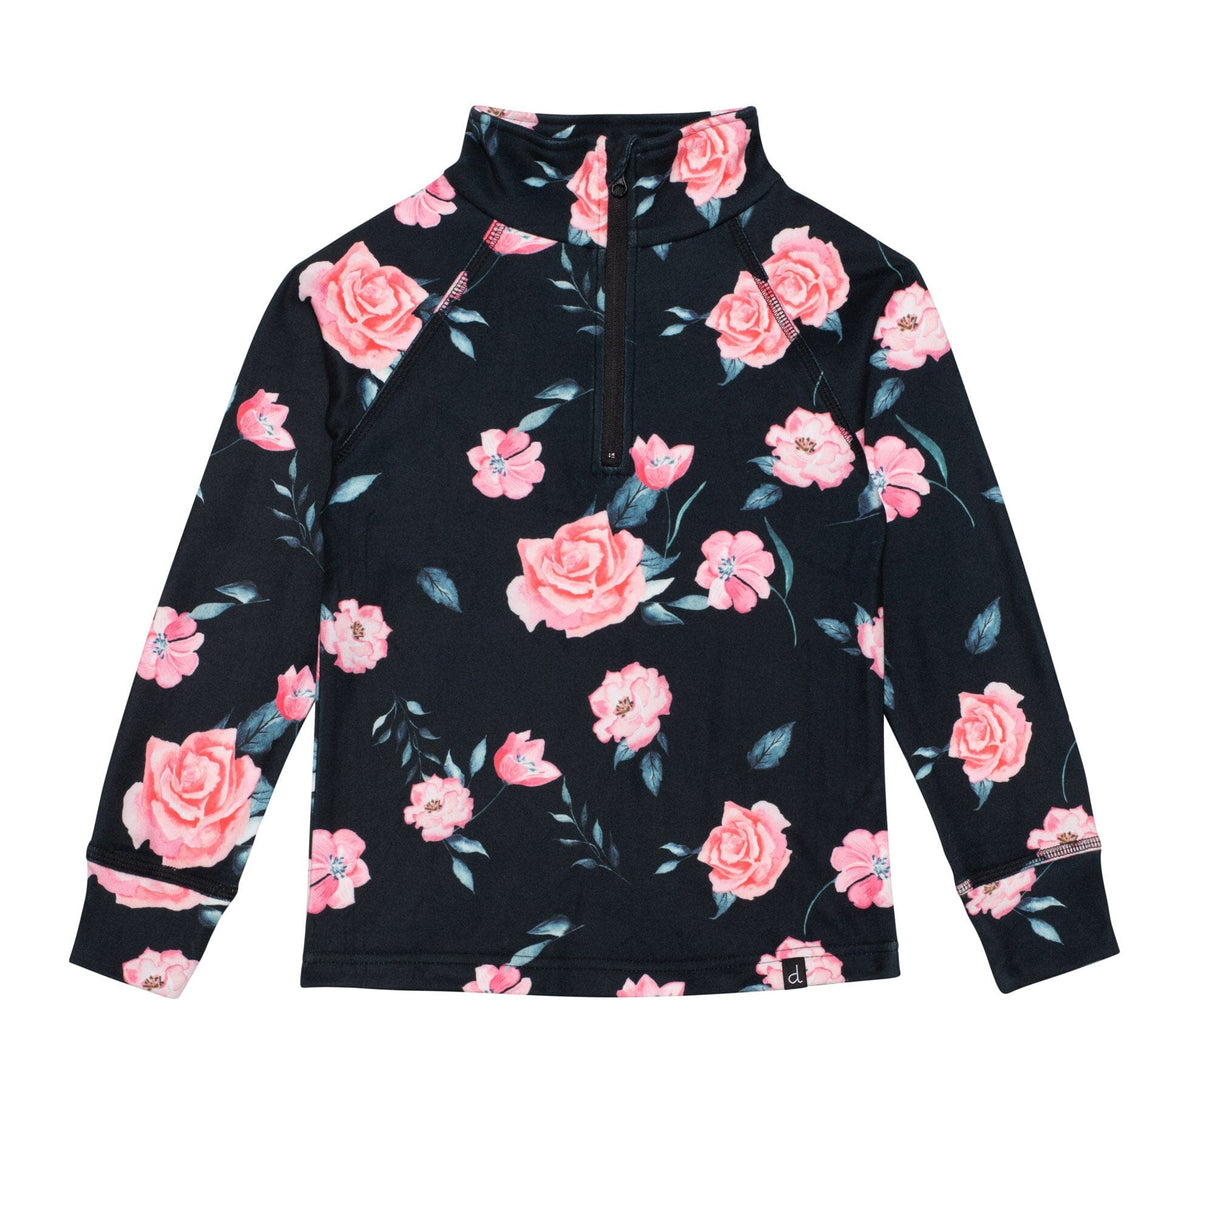 Two Piece Black Thermal Underwear Set With Rose Print-4